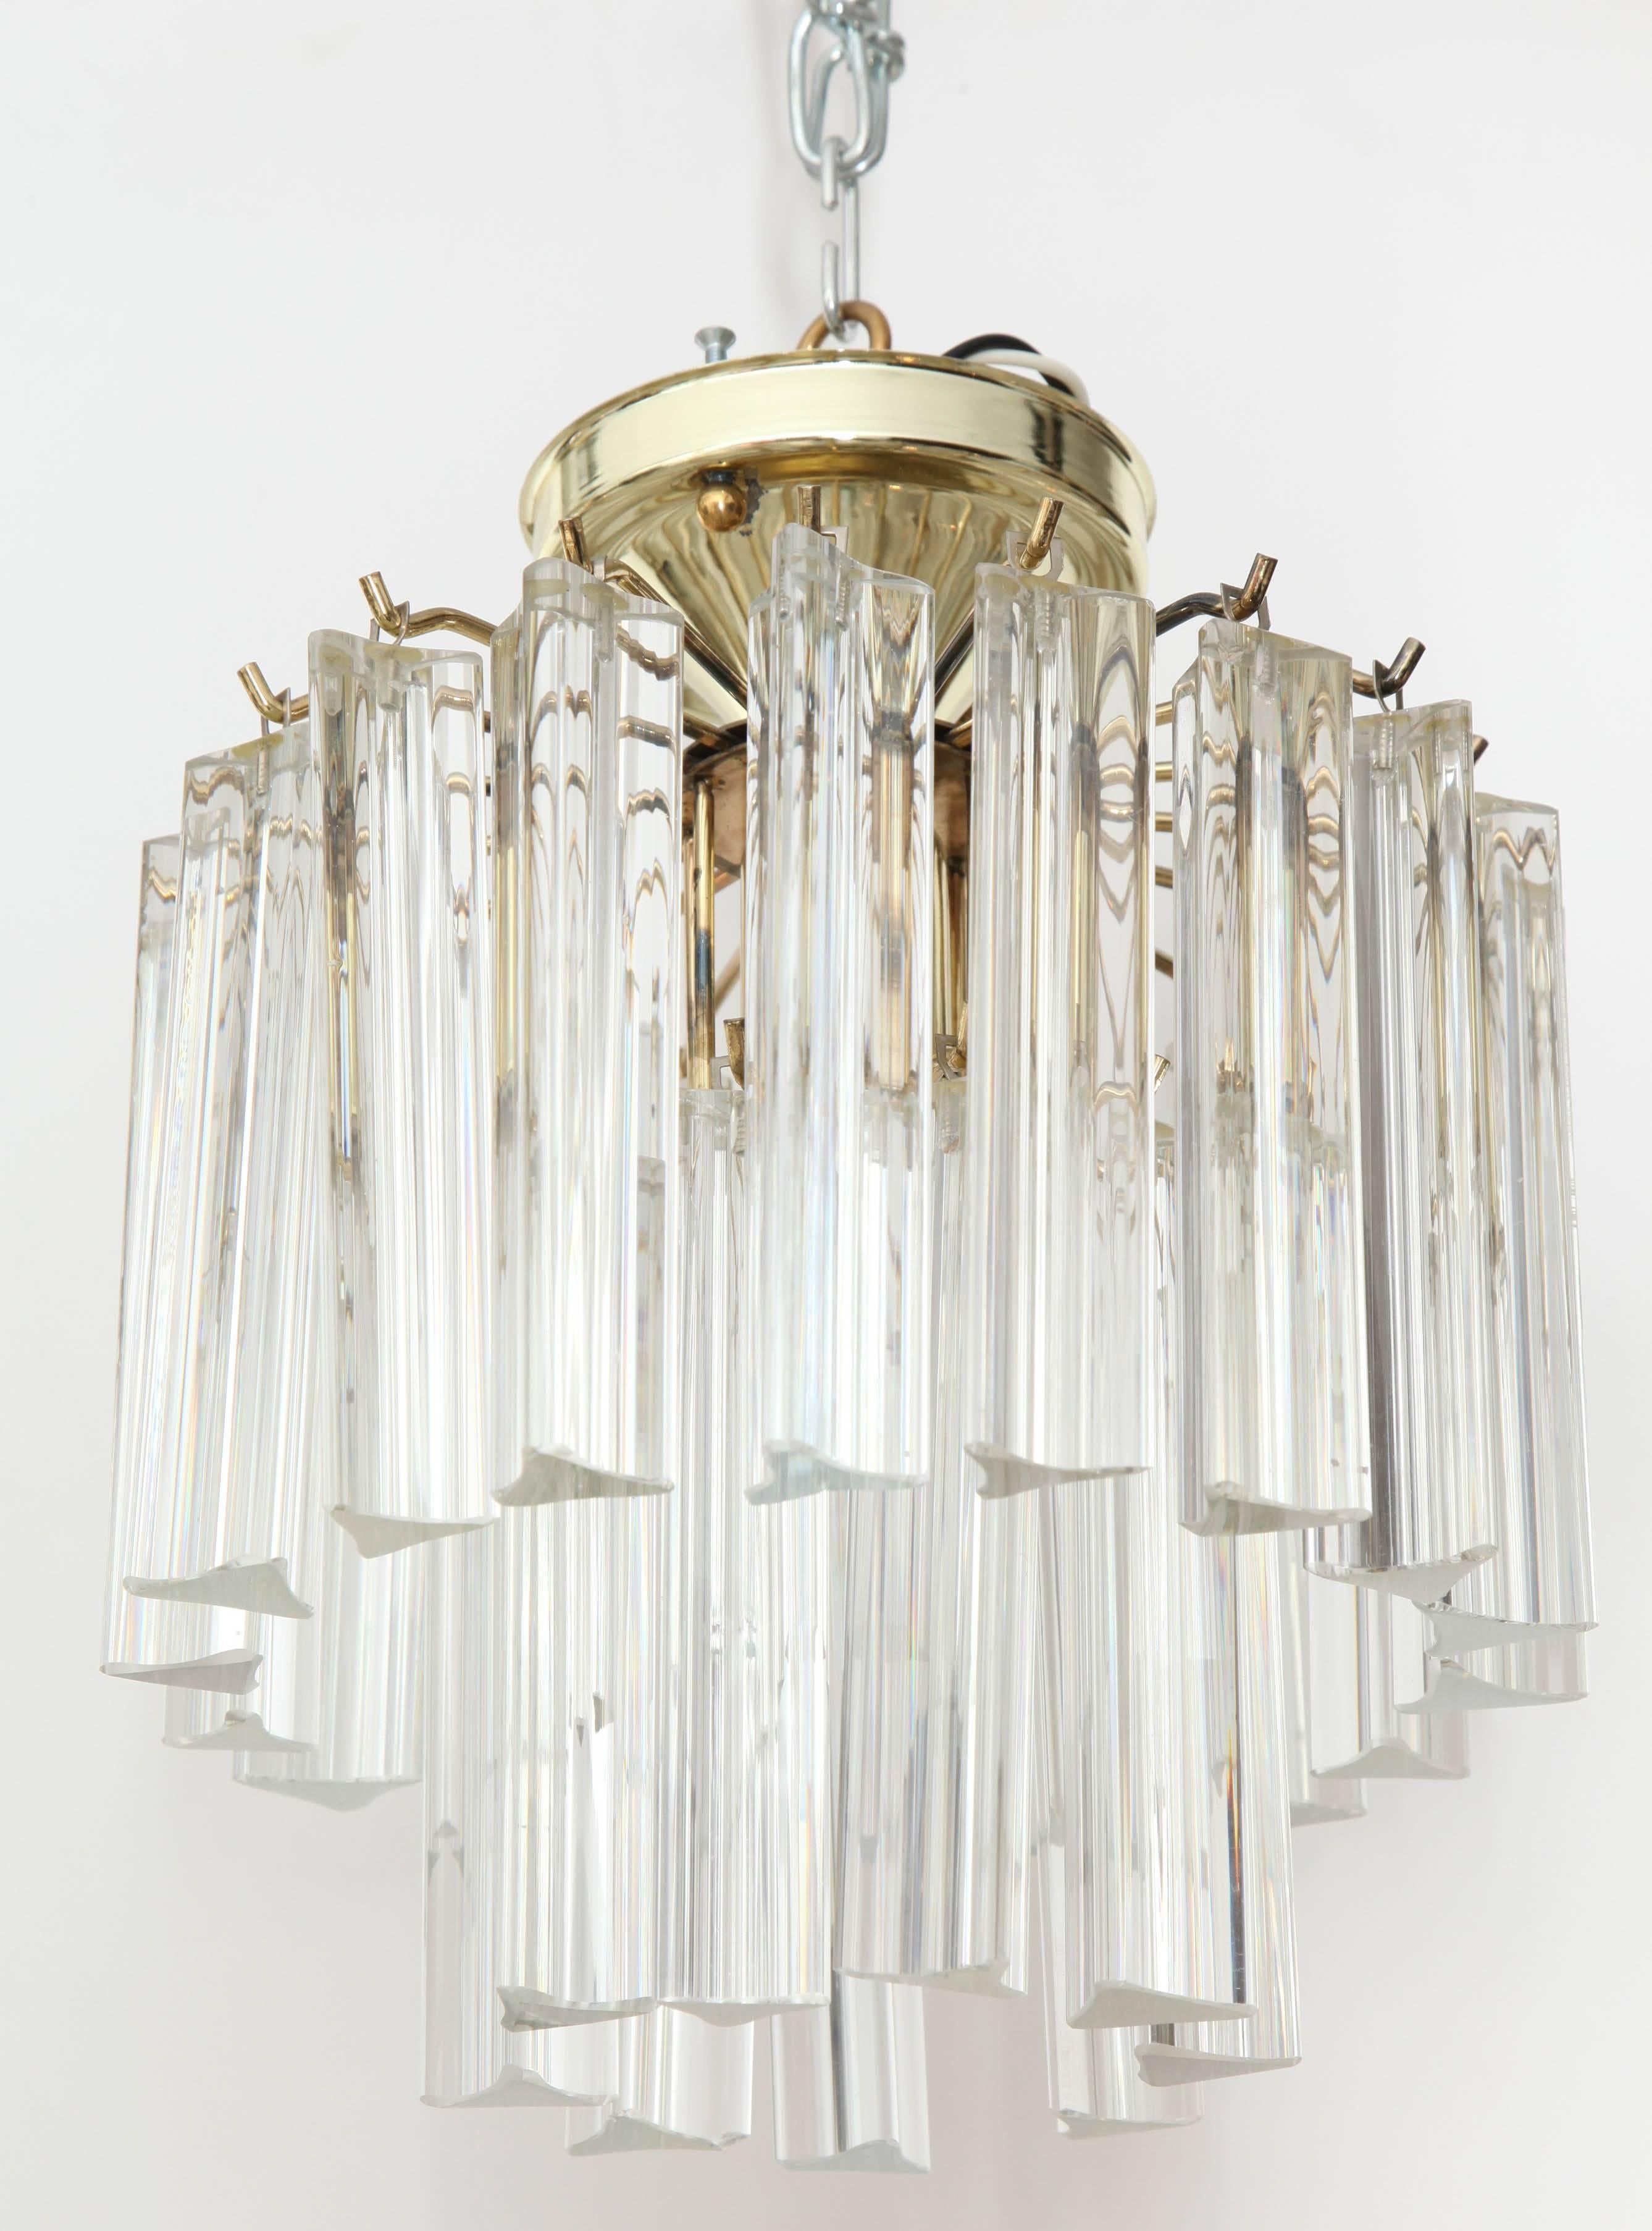 Two-tier crystal flushmount lighting fixture on a brass frame. Uses one central Edison type bulb. Wired for use in the USA.